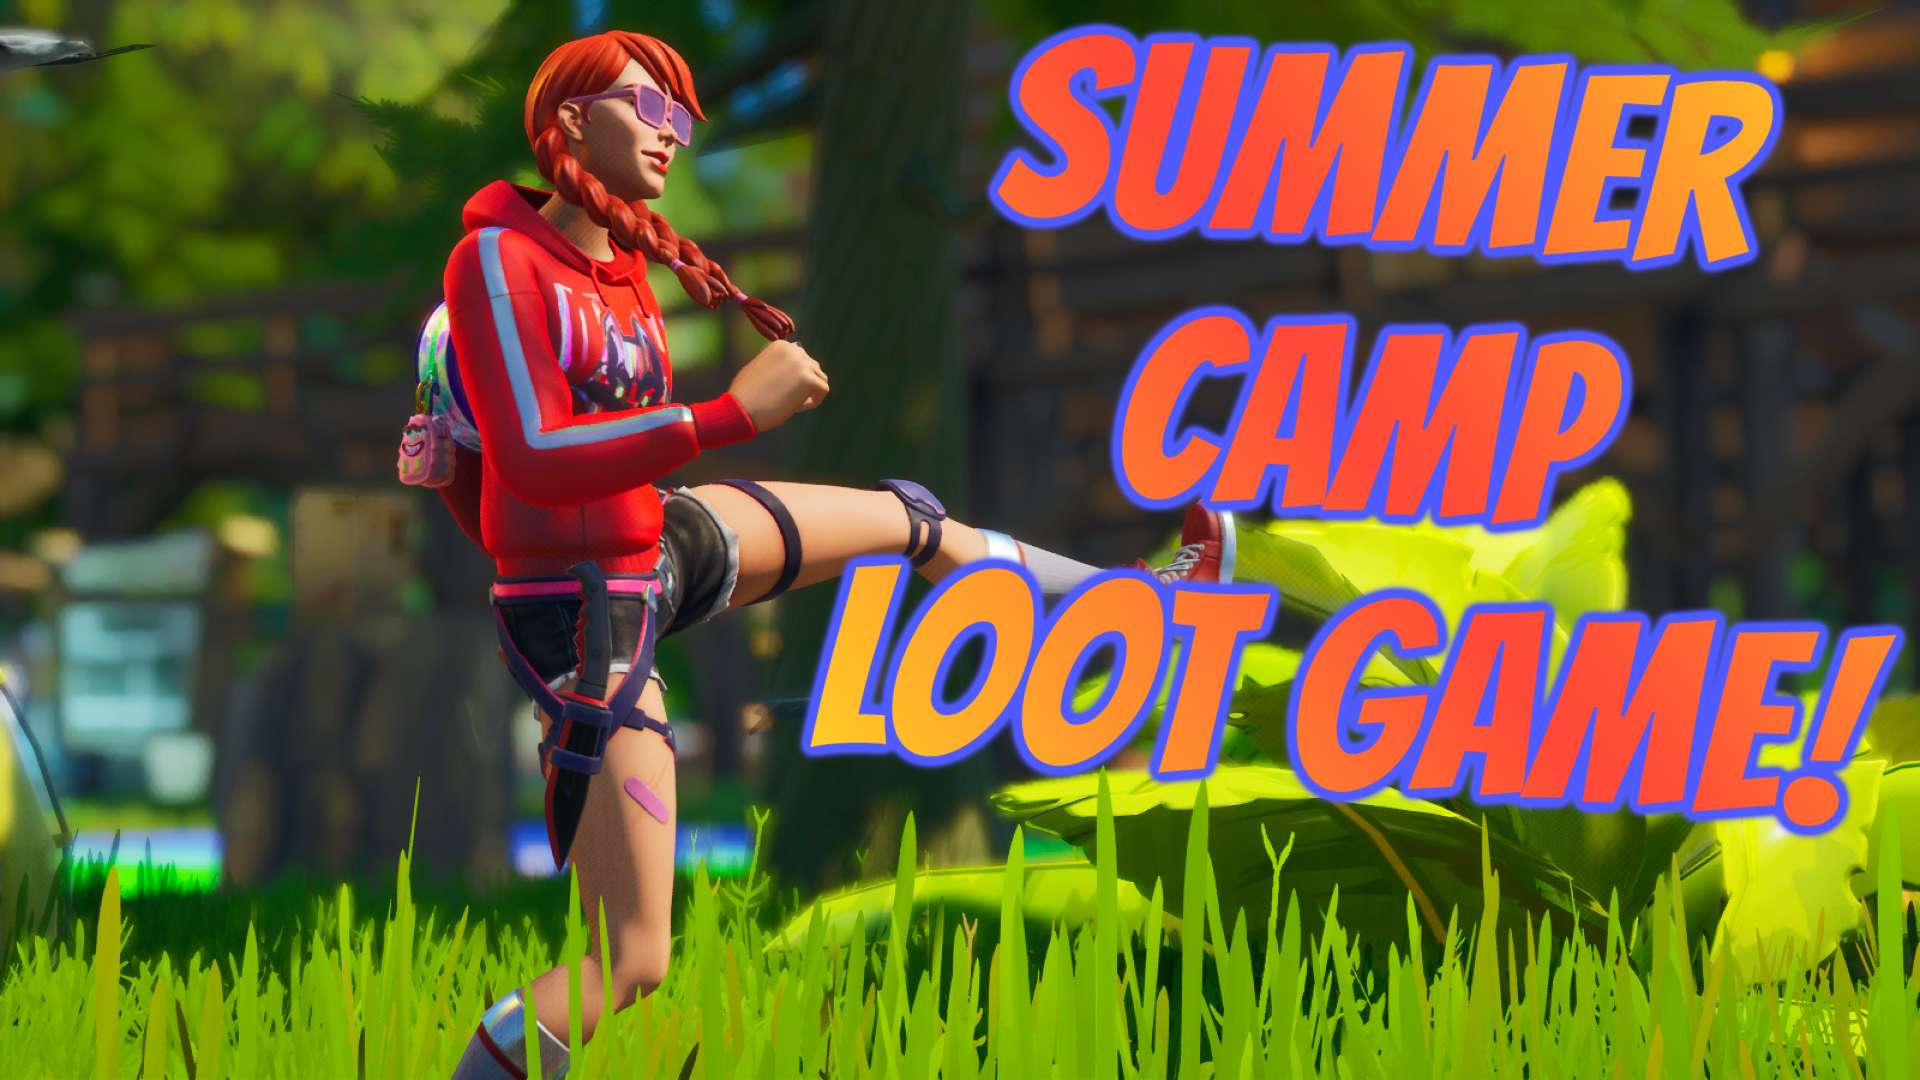 SUMMER CAMP BOARD GAME FOR LOOT